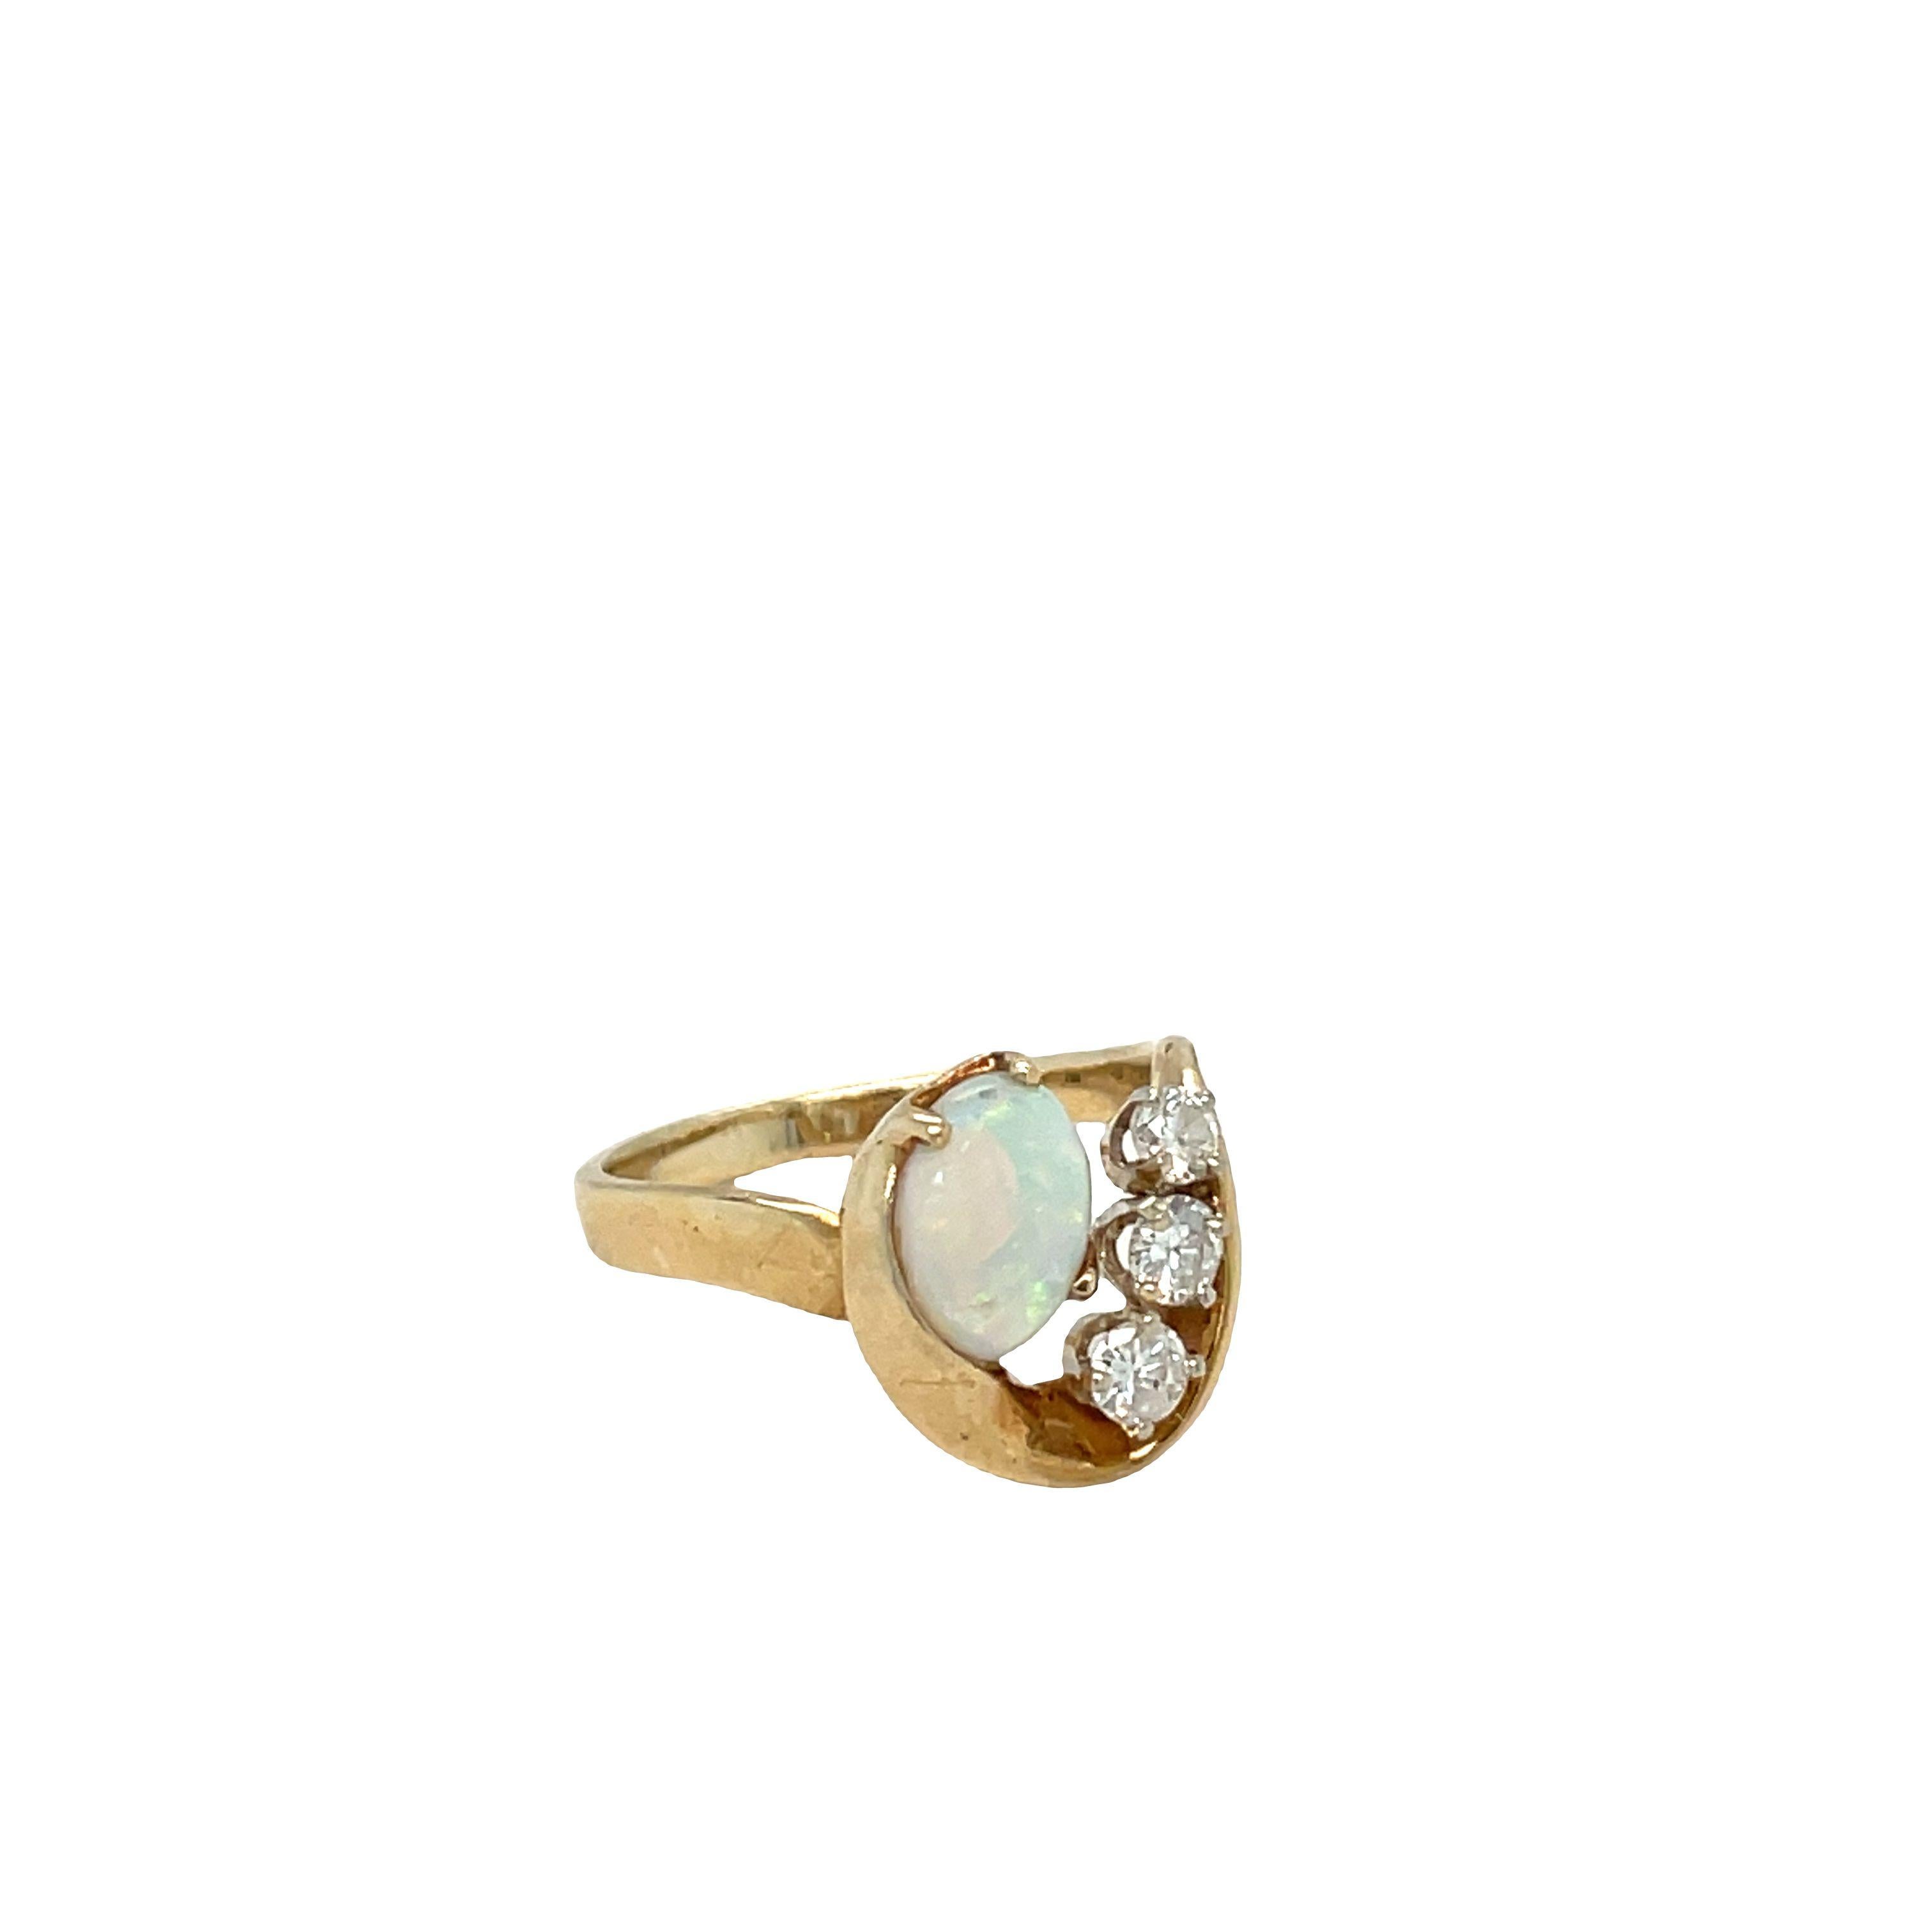 This 14k yellow gold ring is stunning with a freeform opal gemstone that will catch your eye. The opal is an oval cabochon cut, measuring 8mm x 6mm and weighs around 0.80 carat. Three round brilliant cut diamonds enhance the opal and add a total